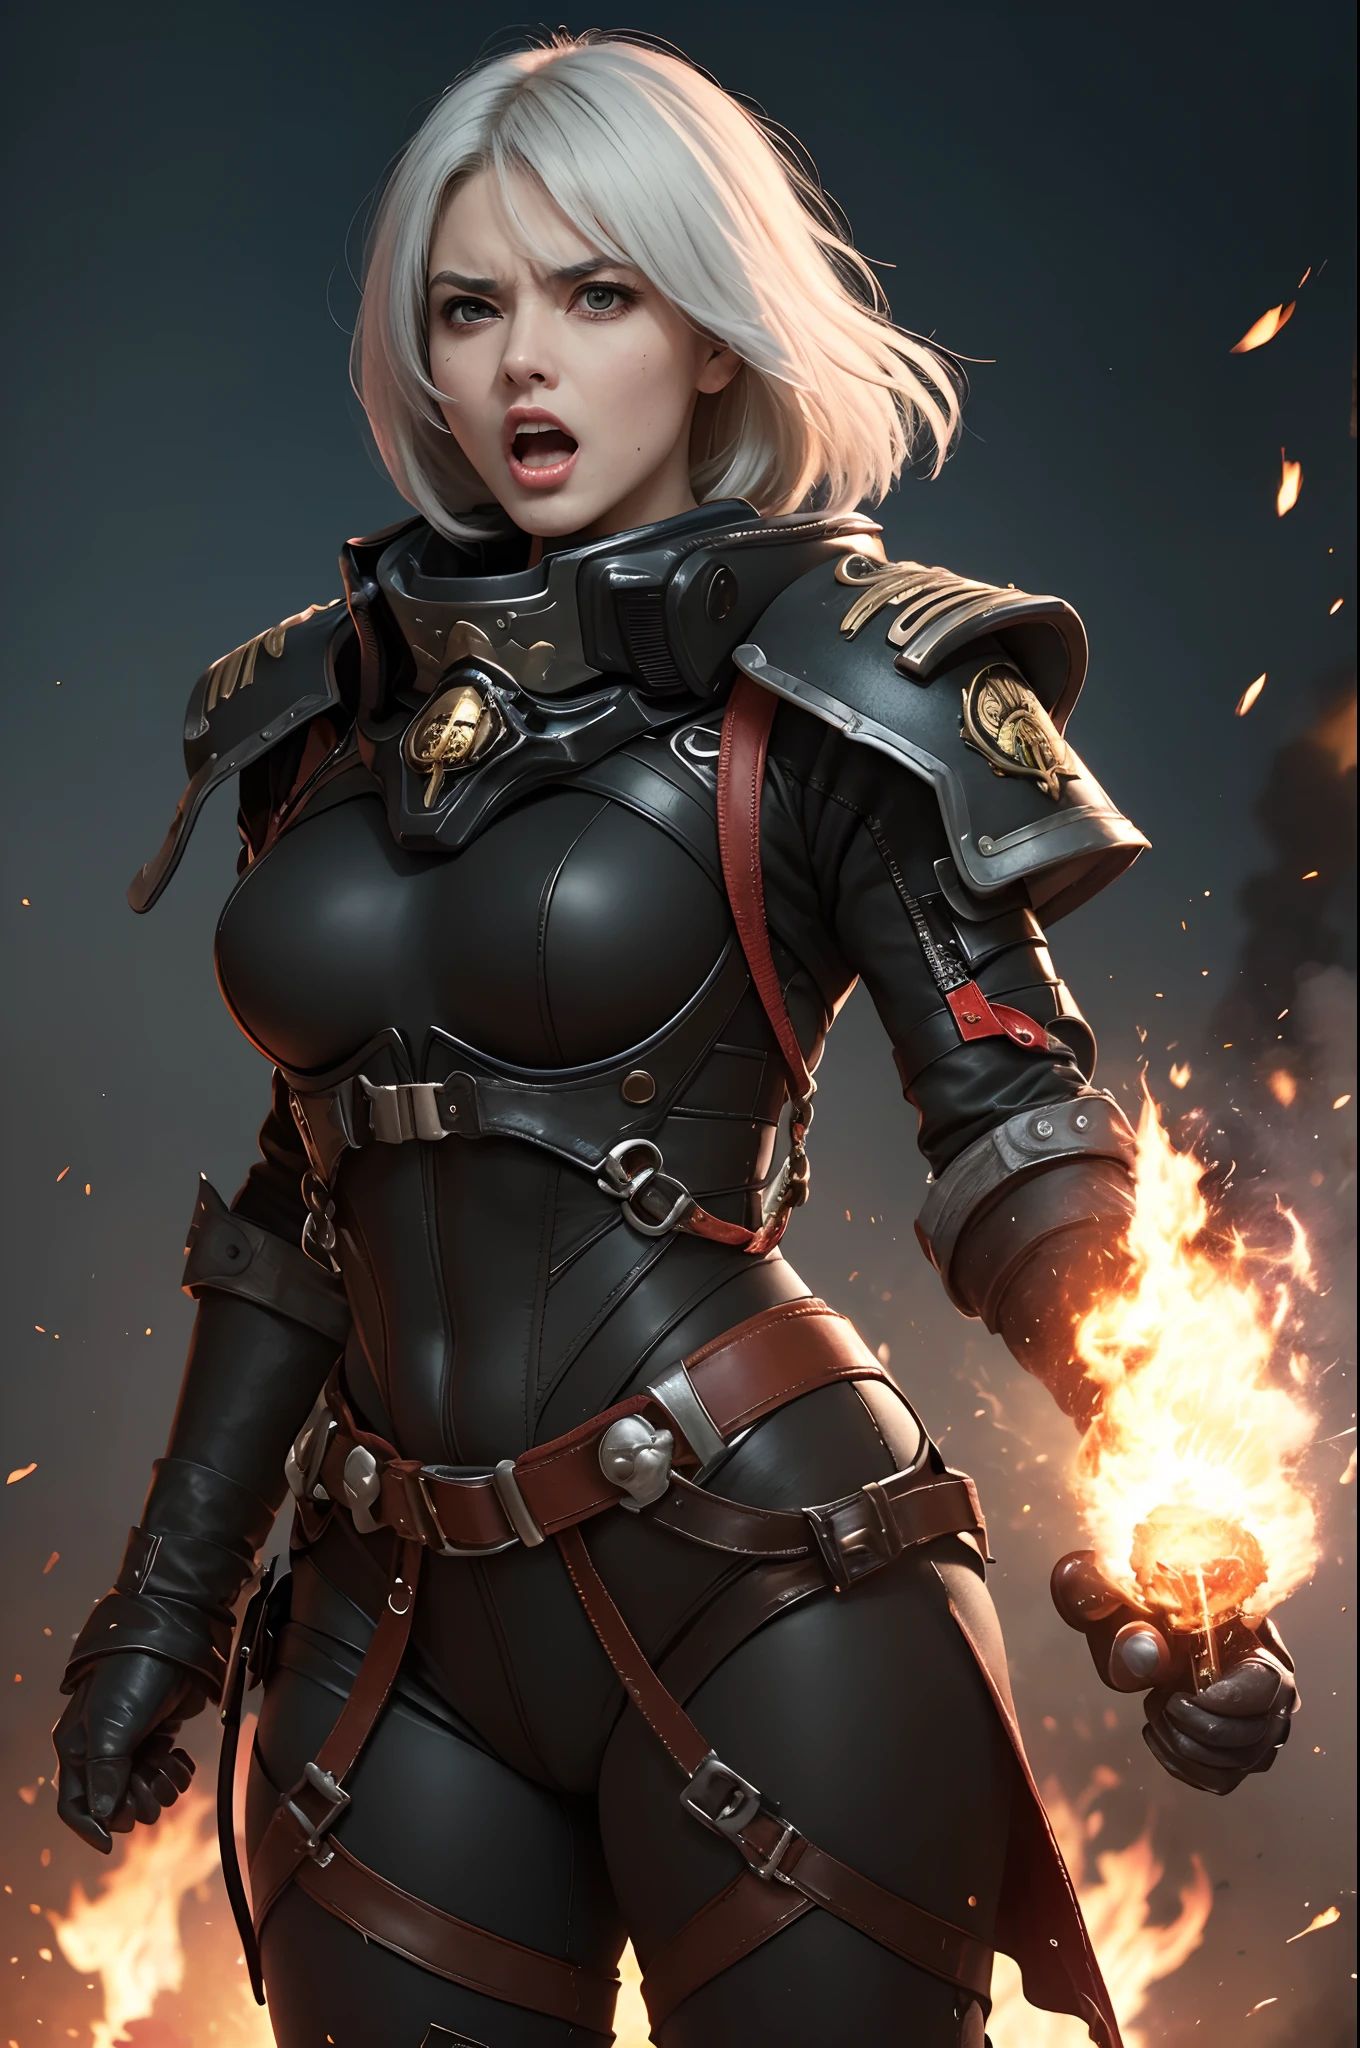 (Highest image quality, outstanding details, ultra-high resolution), 1 girl, suit((futuristic military outfit, adepta sororitas, military harness, military gears such as pouches)), (glamour body, curvy body, buffed and muscular body, tight abs, ), background(warfare background including explosion and flame), (open mouth and shout out for war cry, angry expression, aggressive expression, pointing to a direction, advancing forward, dynamic pose), white hair, cowboy shot, low angle,